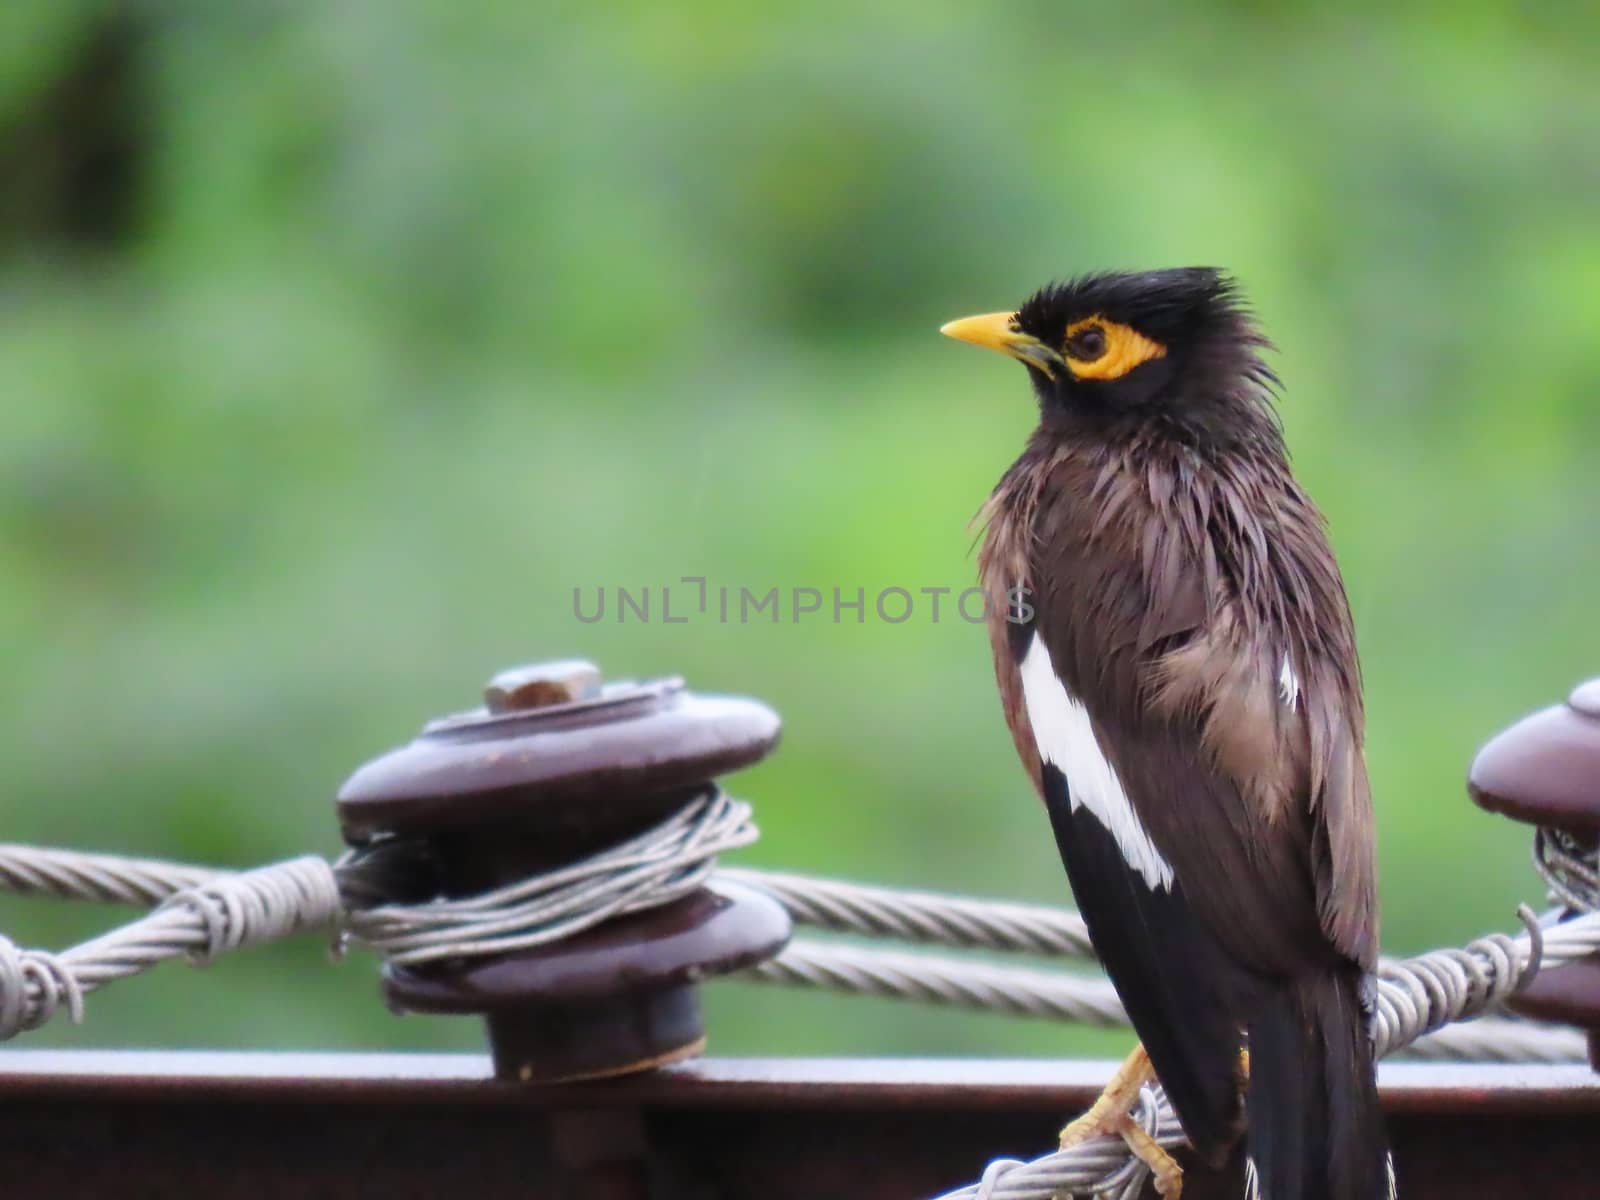 Myna bird sitting on electric wire soaked in rain by 9500102400